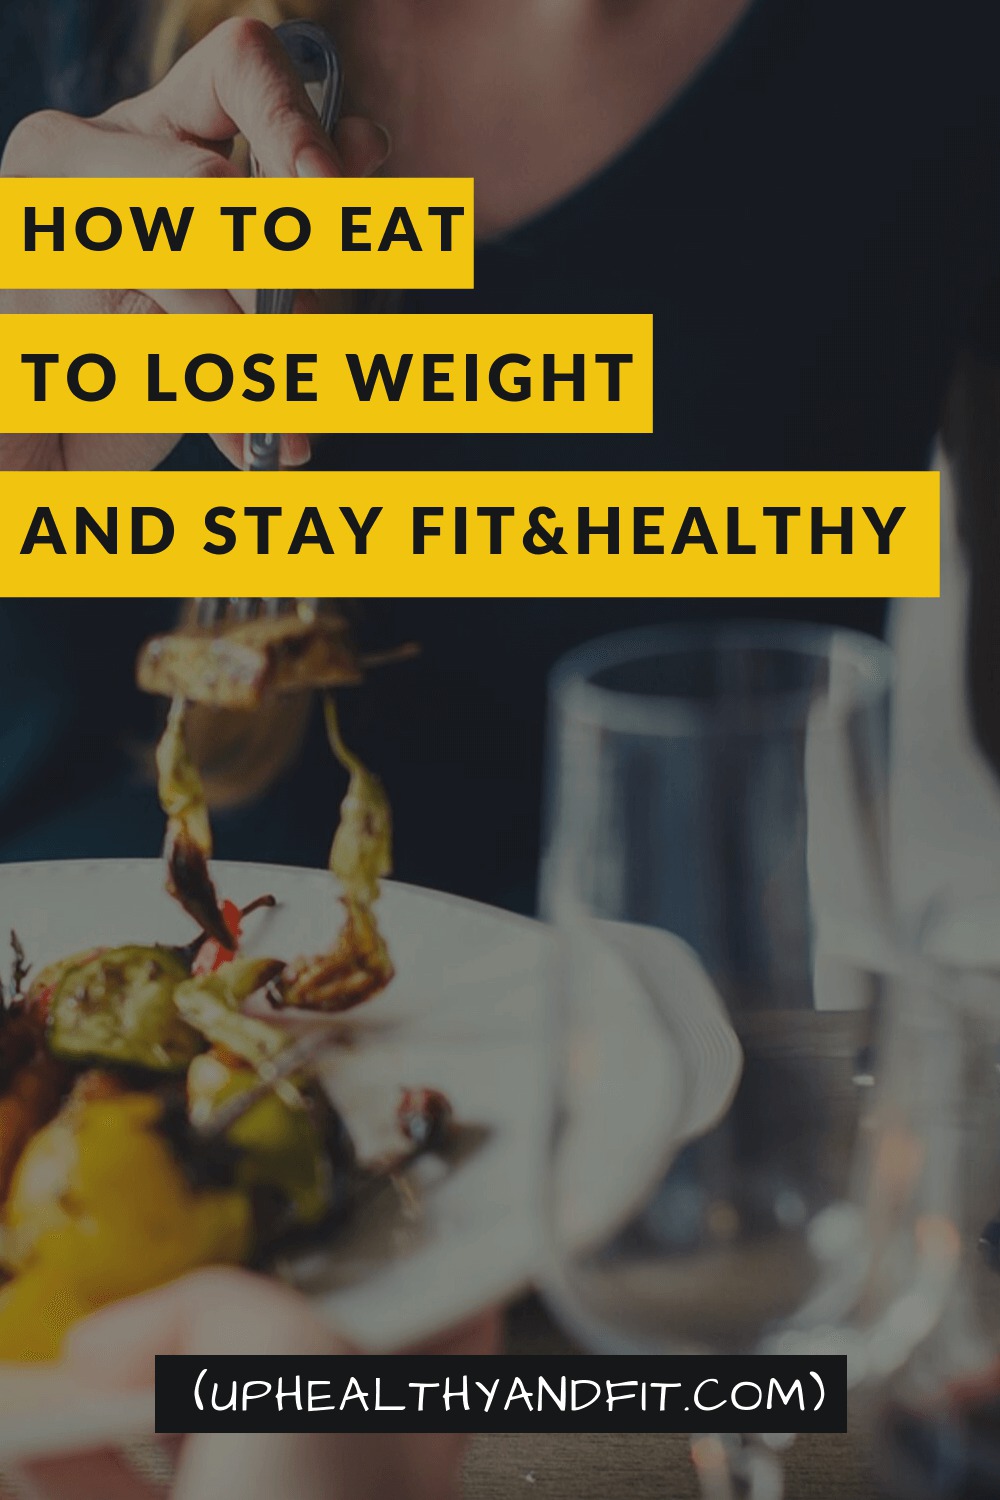 how-to-eat-to-lose-weight-and-stay-fit-and-healthy